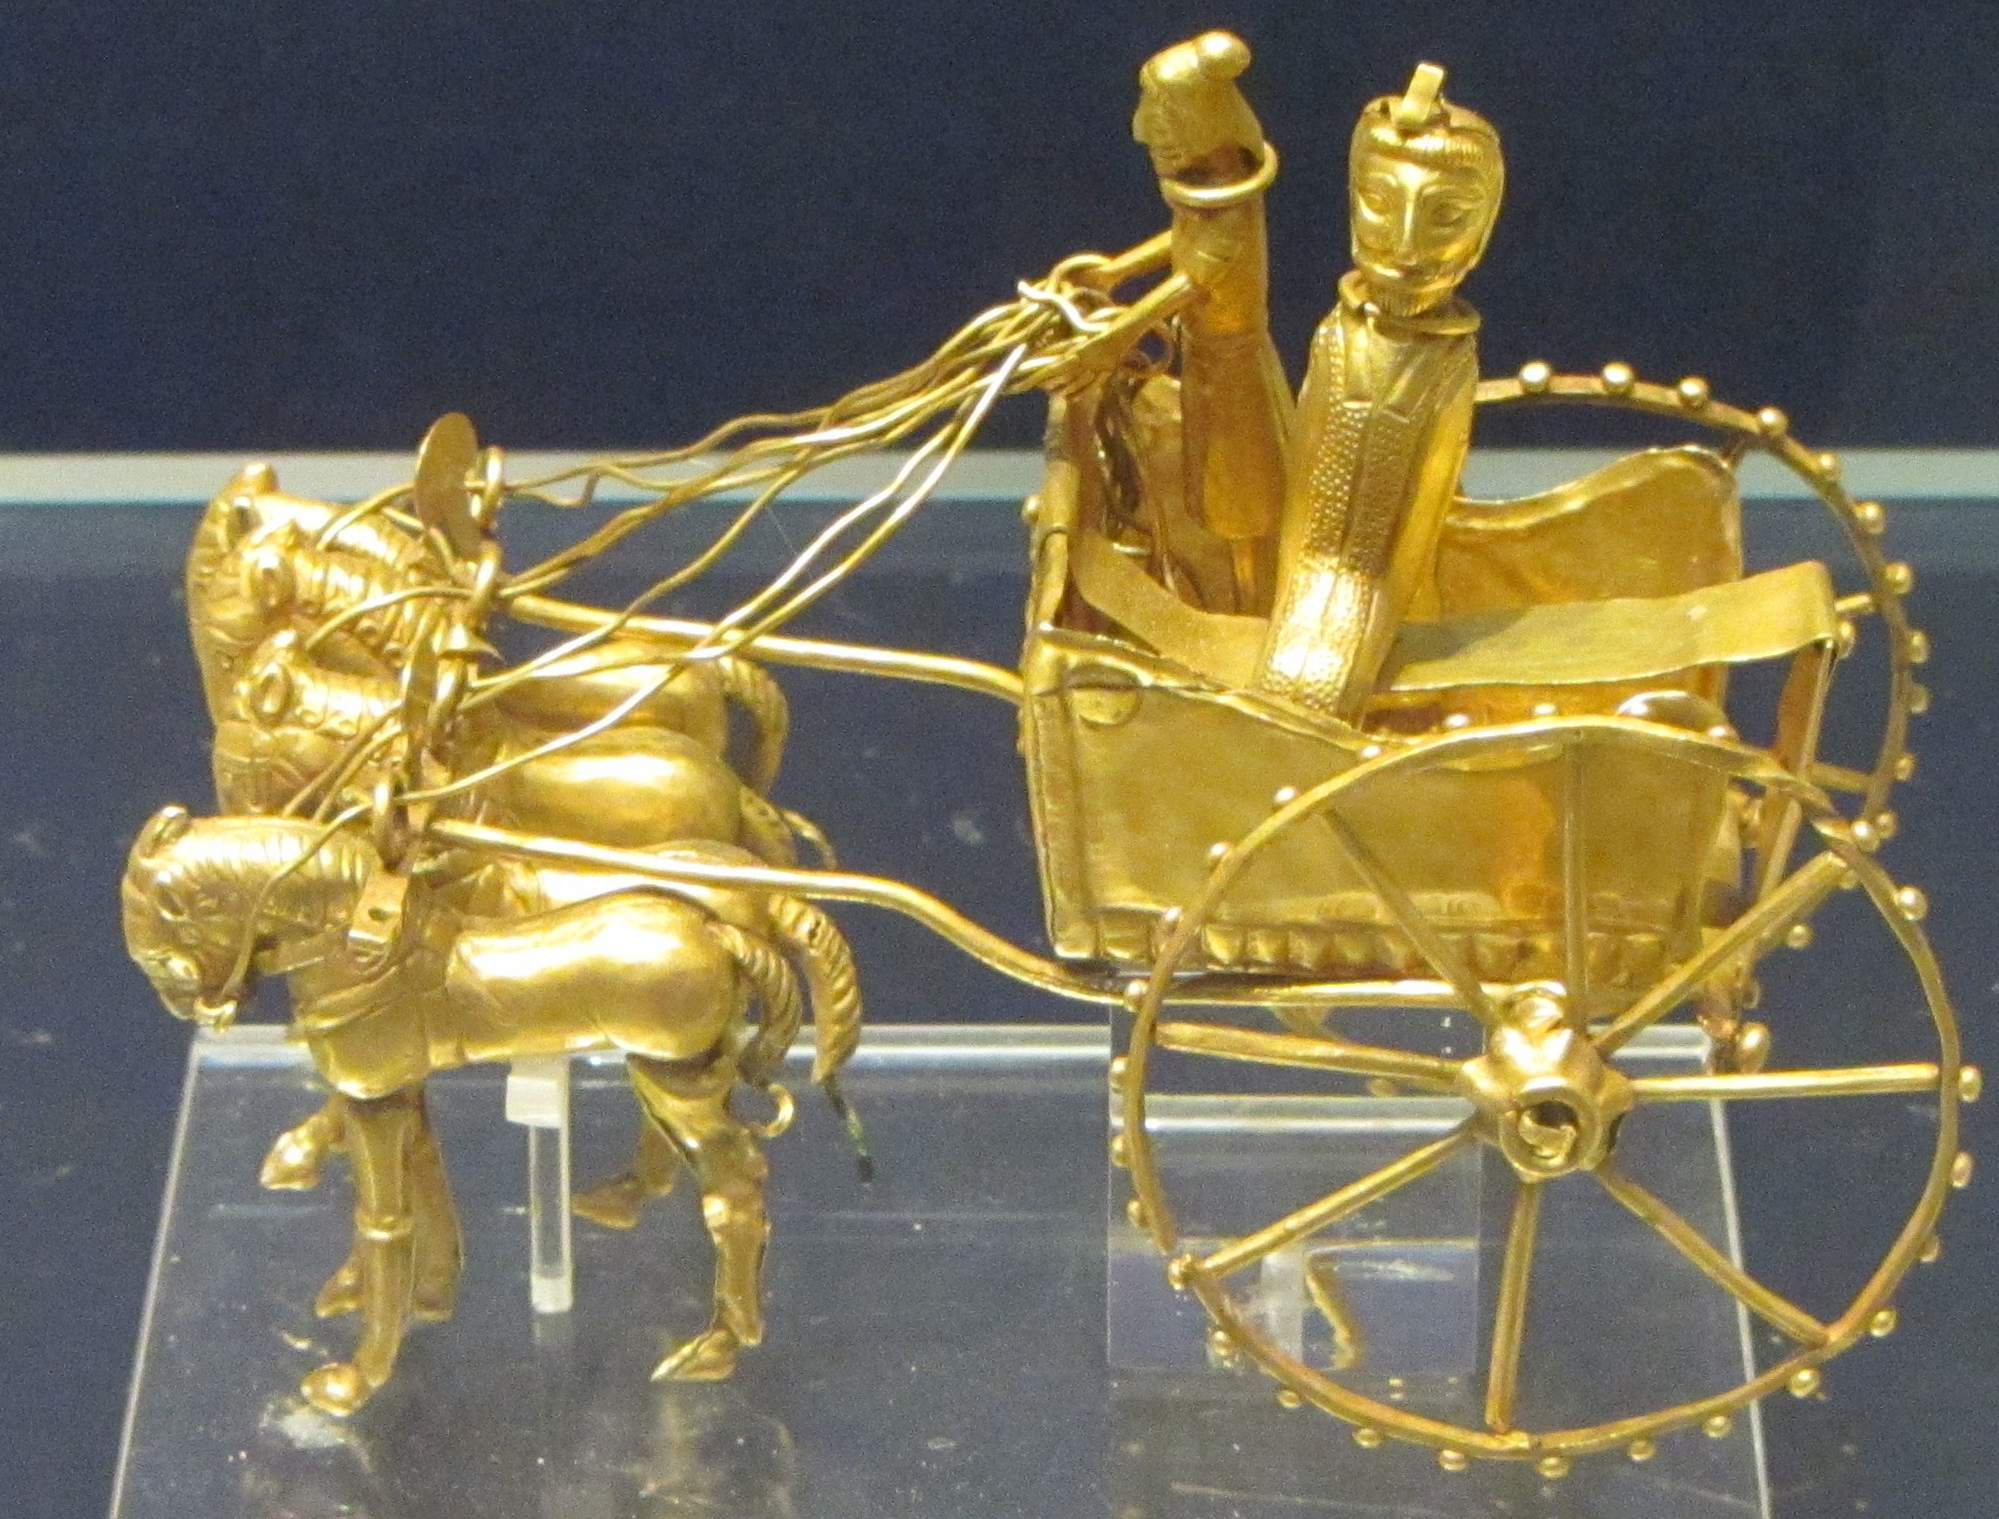 Oxus chariot model, from the region of Takht-i Kuwad, Tadjikistan, Achaemenid Persian, 5th-4th century BC. By BabelStone (Own work)